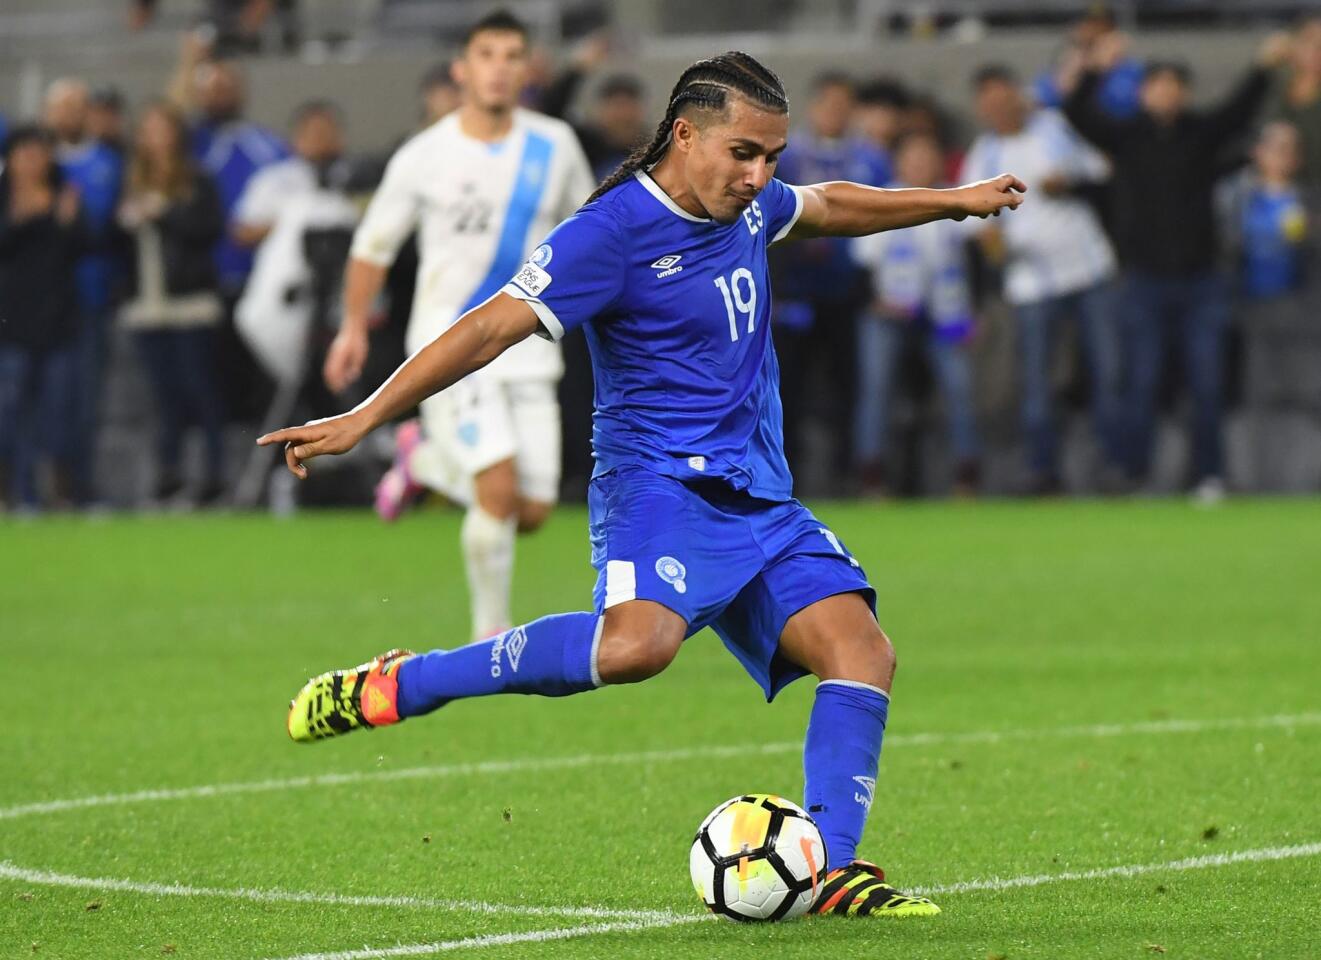 Gerson Mayen of El Salvador hits the ball during their international friendly match against Guatemala at the Banc of California Stadium in Los Angeles, California on March 6, 2019. (Photo by Mark RALSTON / AFP)MARK RALSTON/AFP/Getty Images ** OUTS - ELSENT, FPG, CM - OUTS * NM, PH, VA if sourced by CT, LA or MoD **